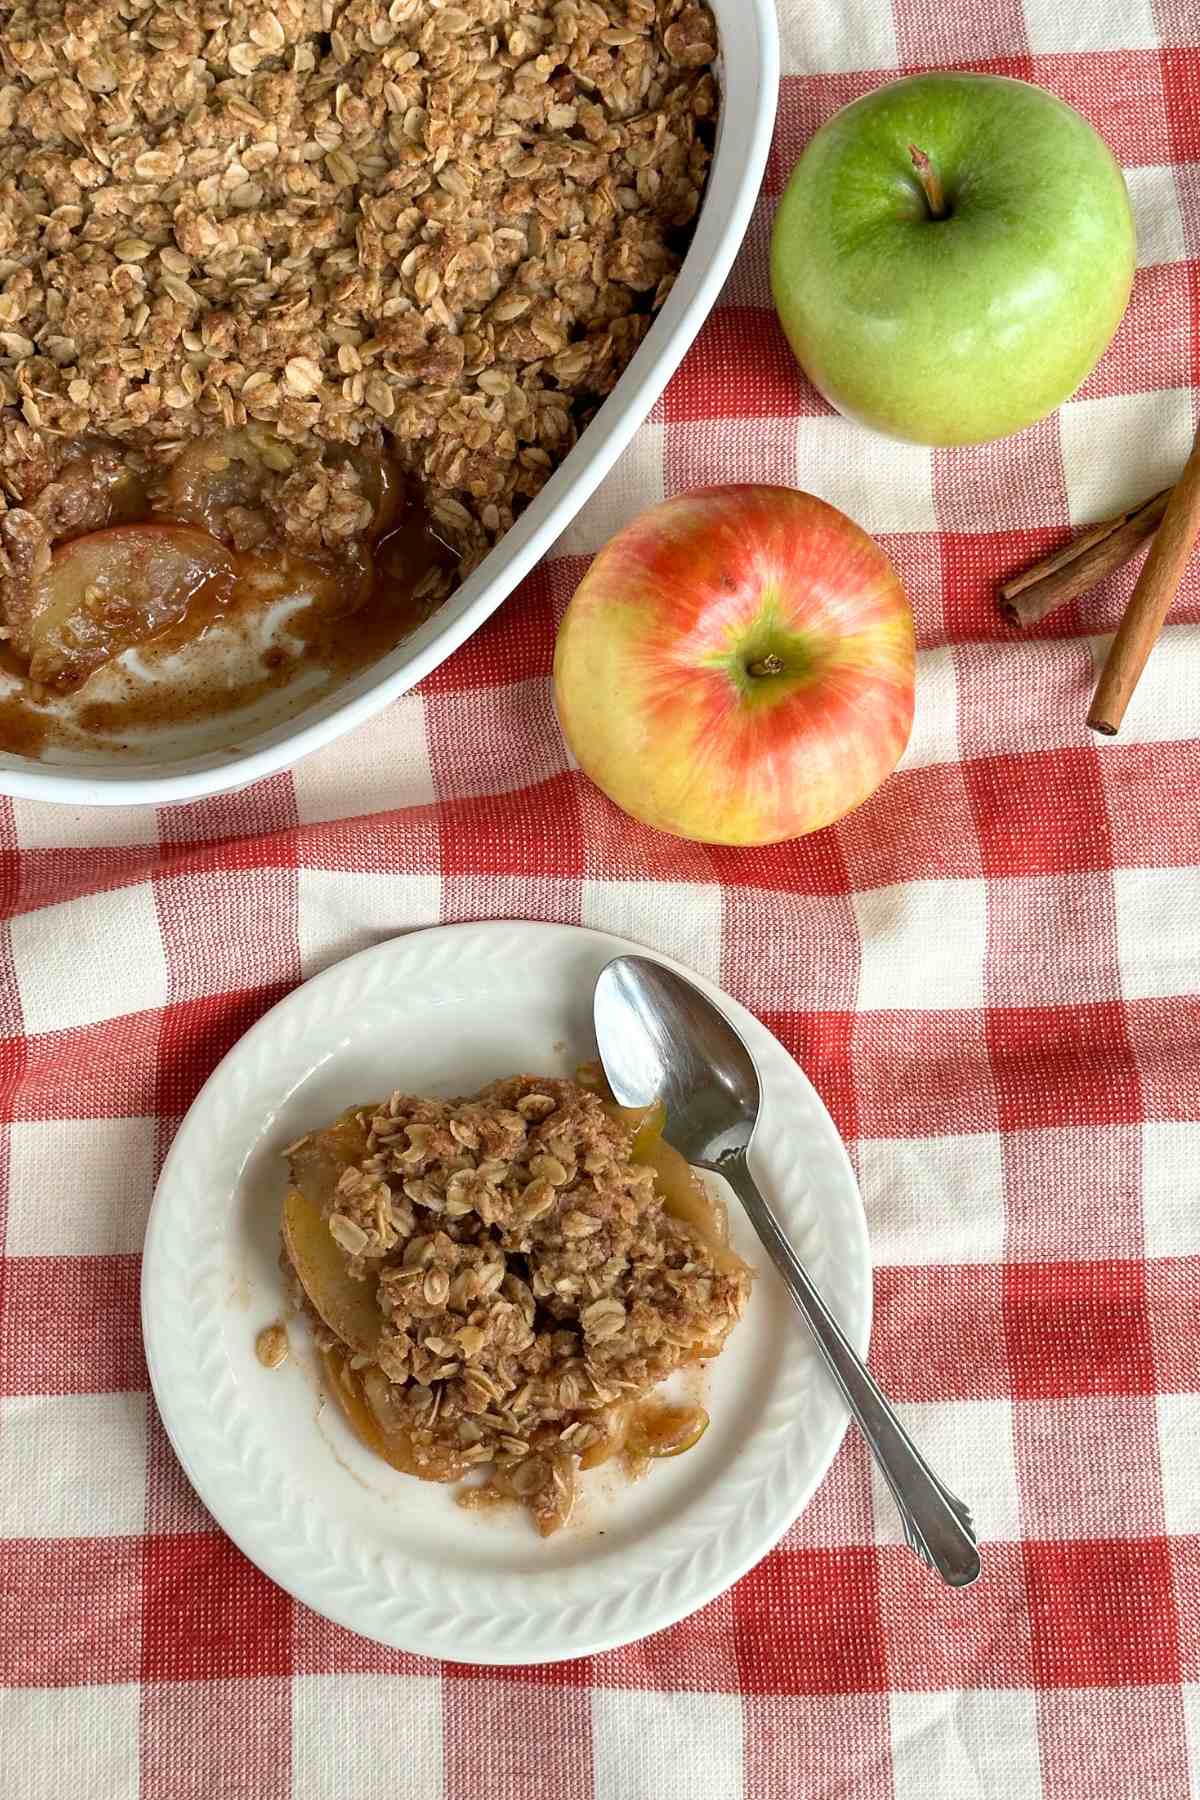 Plate with vegan apple crisp and a spoon next to the dish of apple crisp, a red apple, green apple, and two sticks of cinnamon, all on top of a red and white gingham napkin.